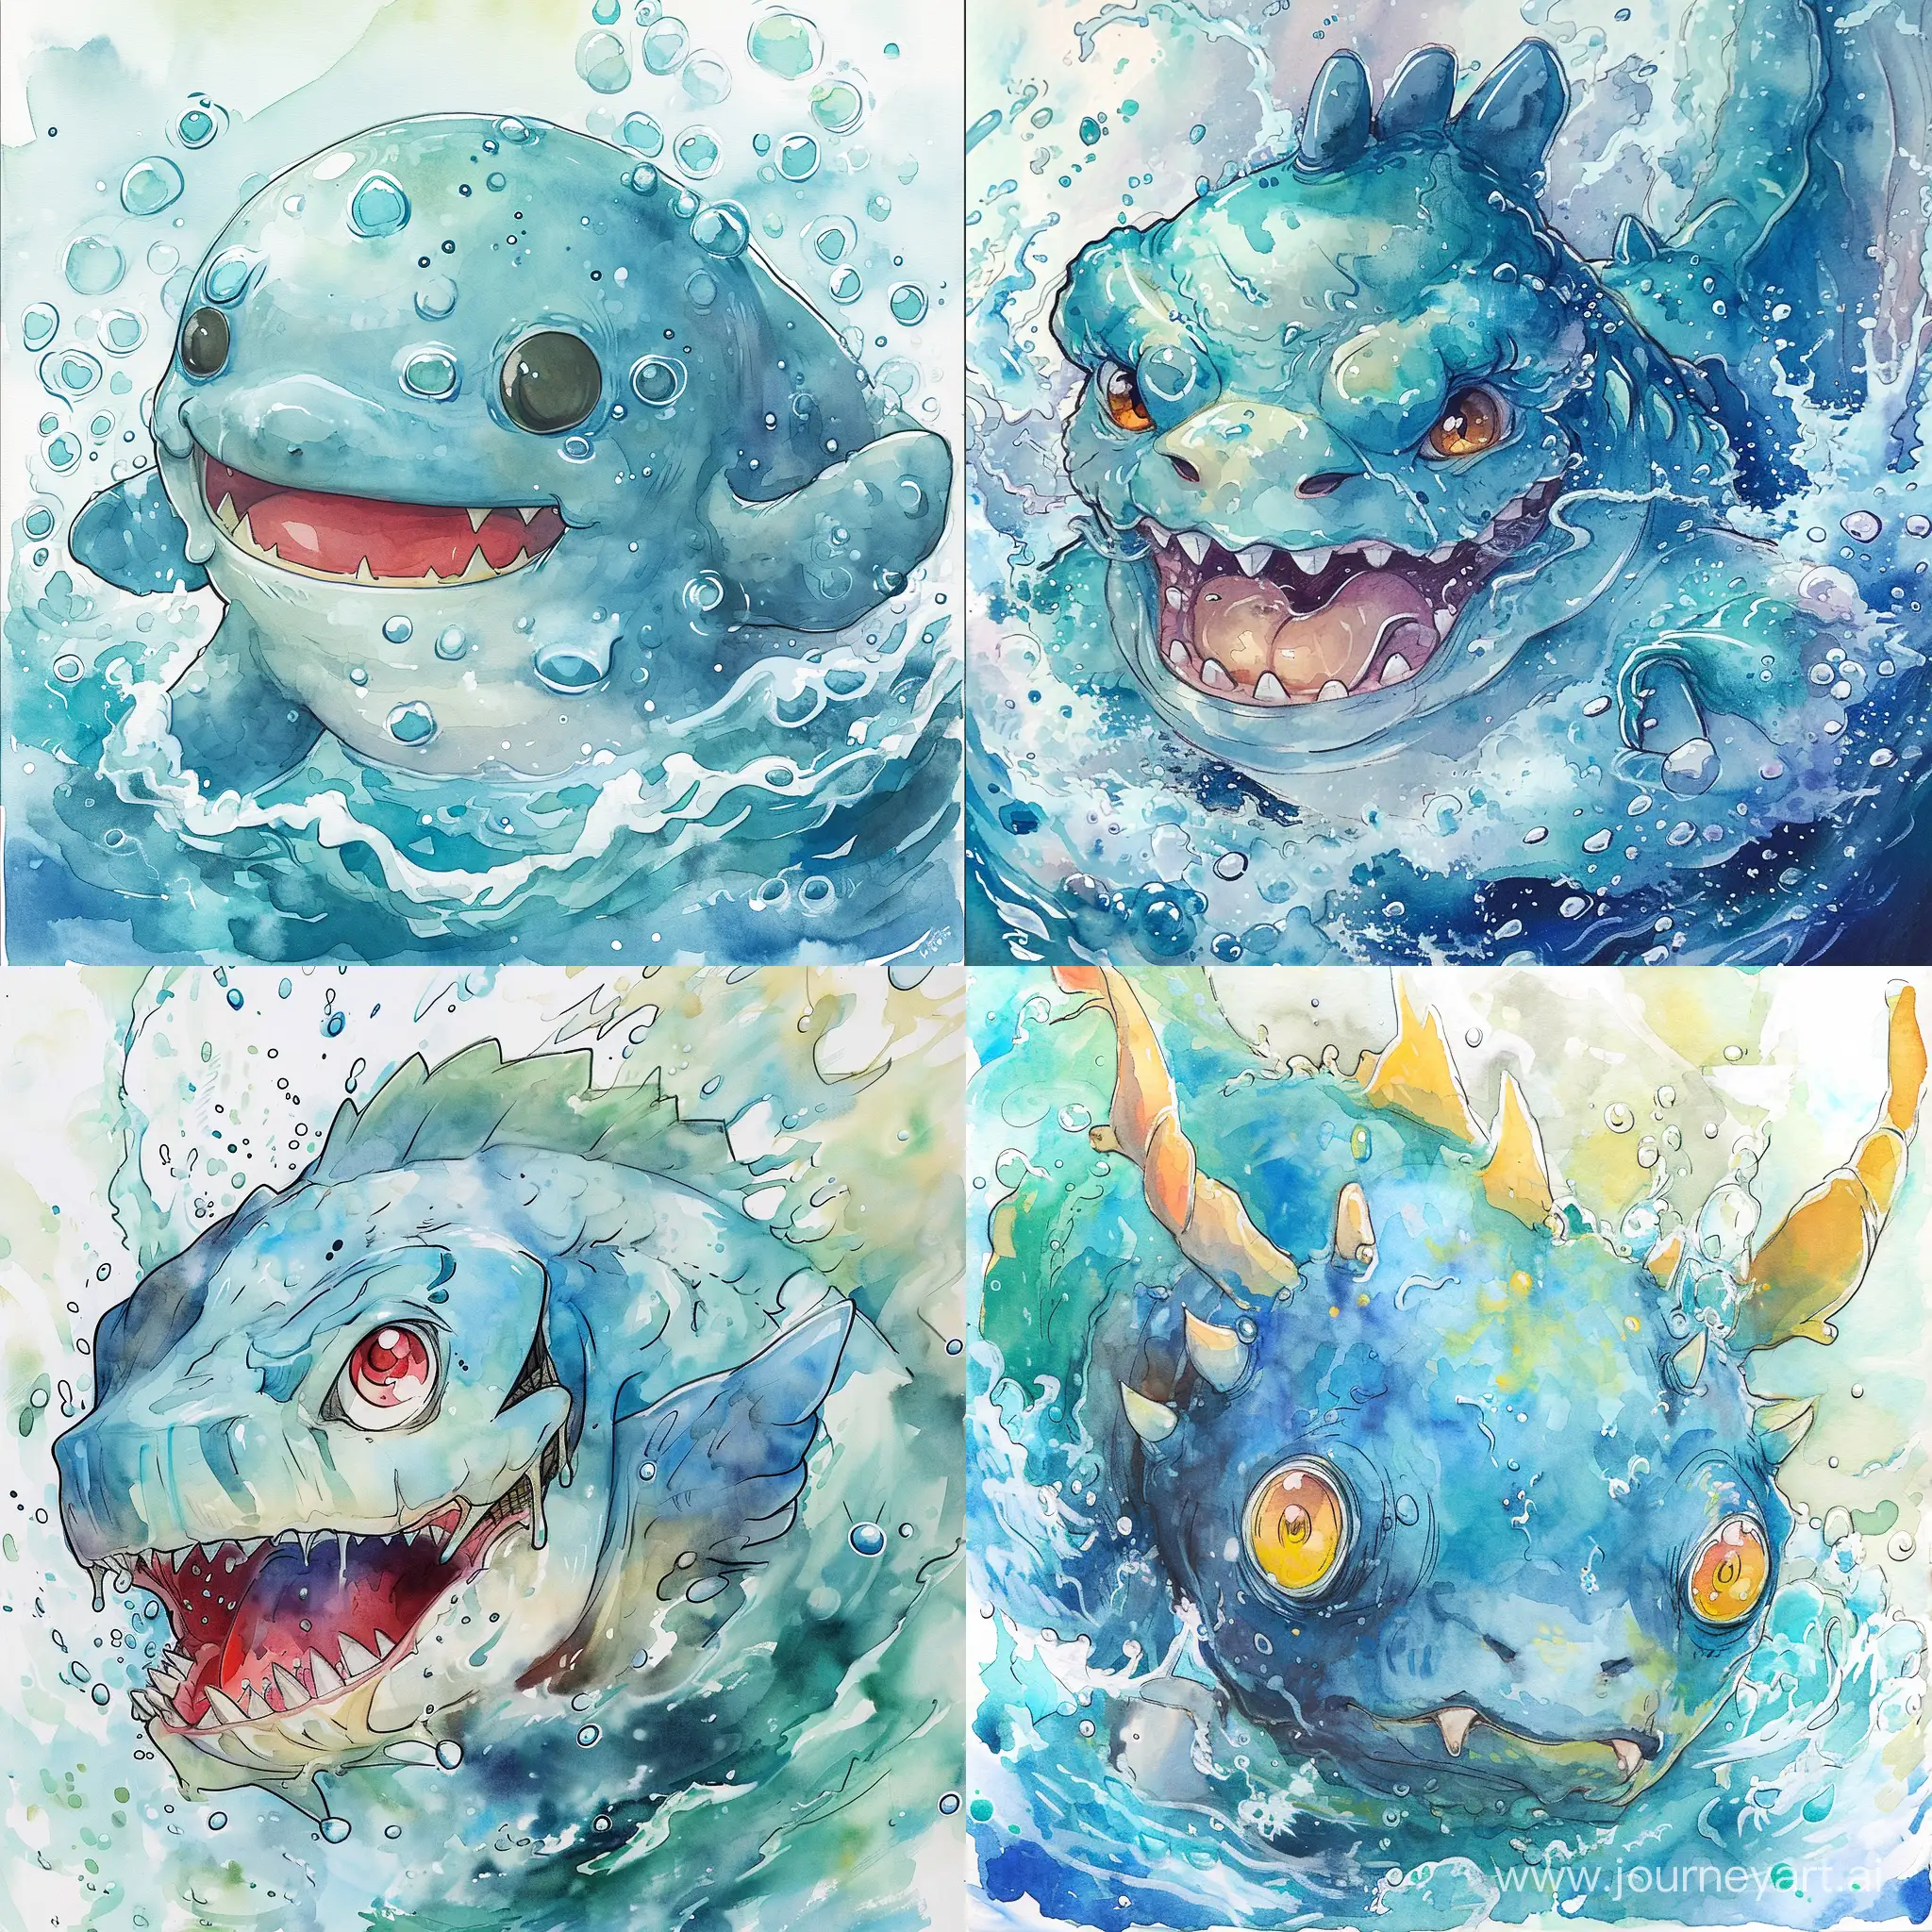 An anime water animal monster, watercolor